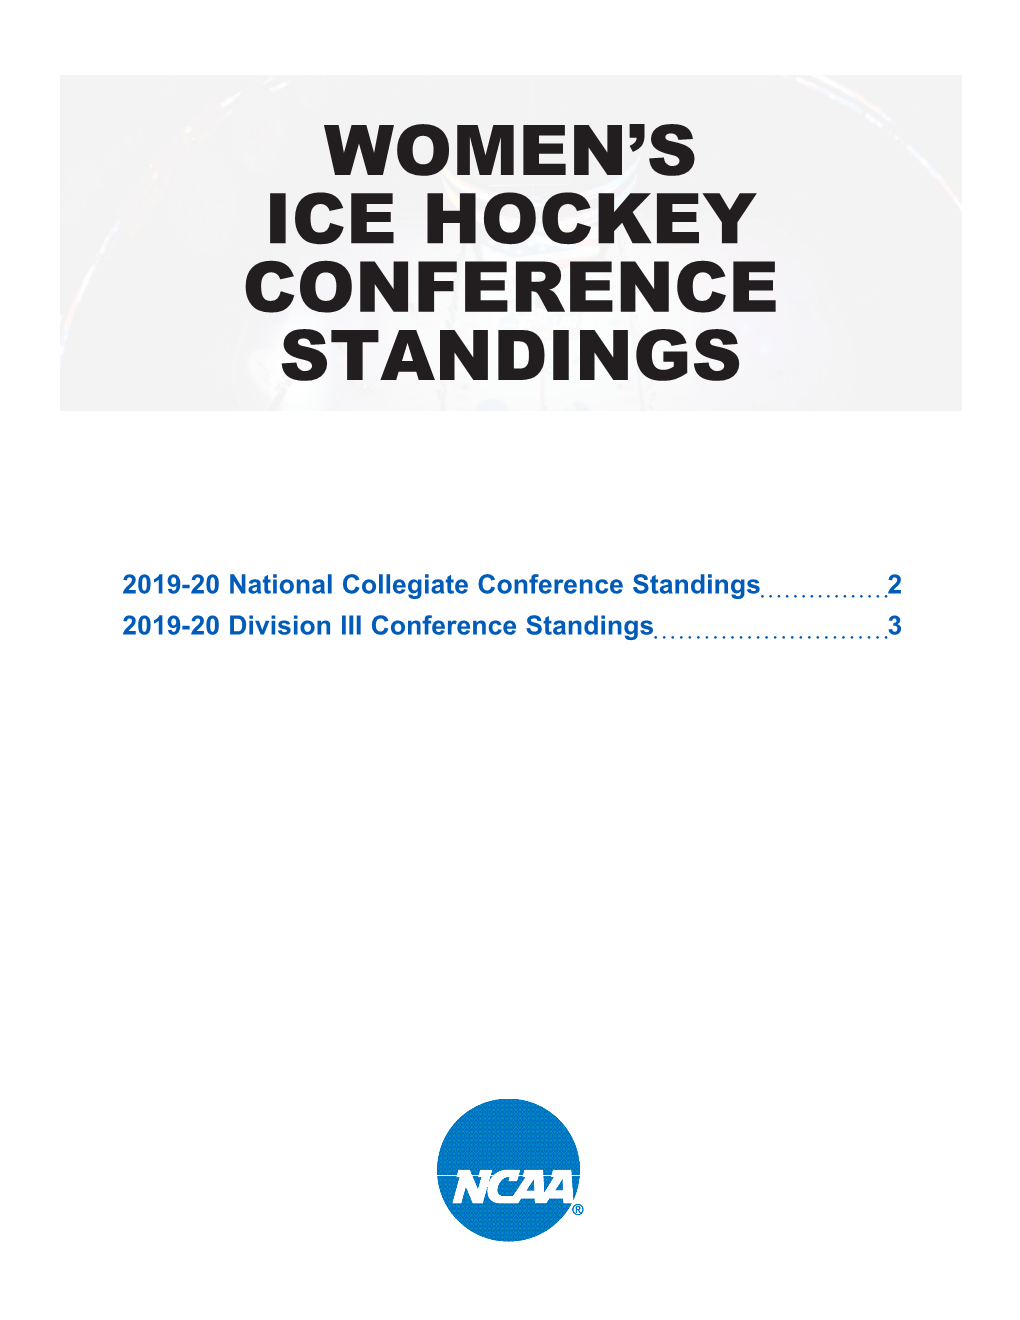 Women's Ice Hockey Conference Standings